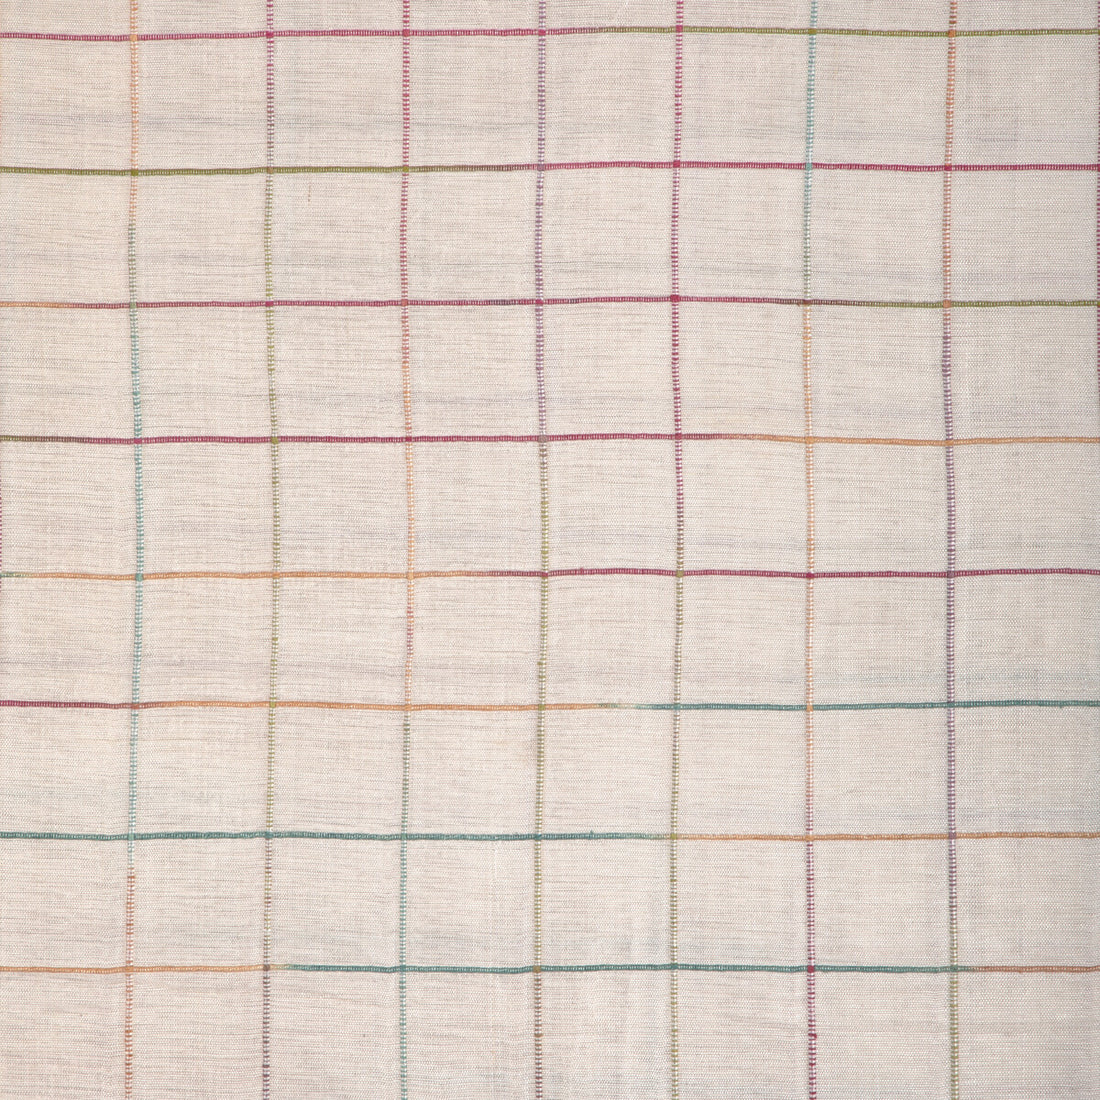 Moulin Check fabric in multi color - pattern 8023149.9175.0 - by Brunschwig &amp; Fils in the Vienne Silks collection